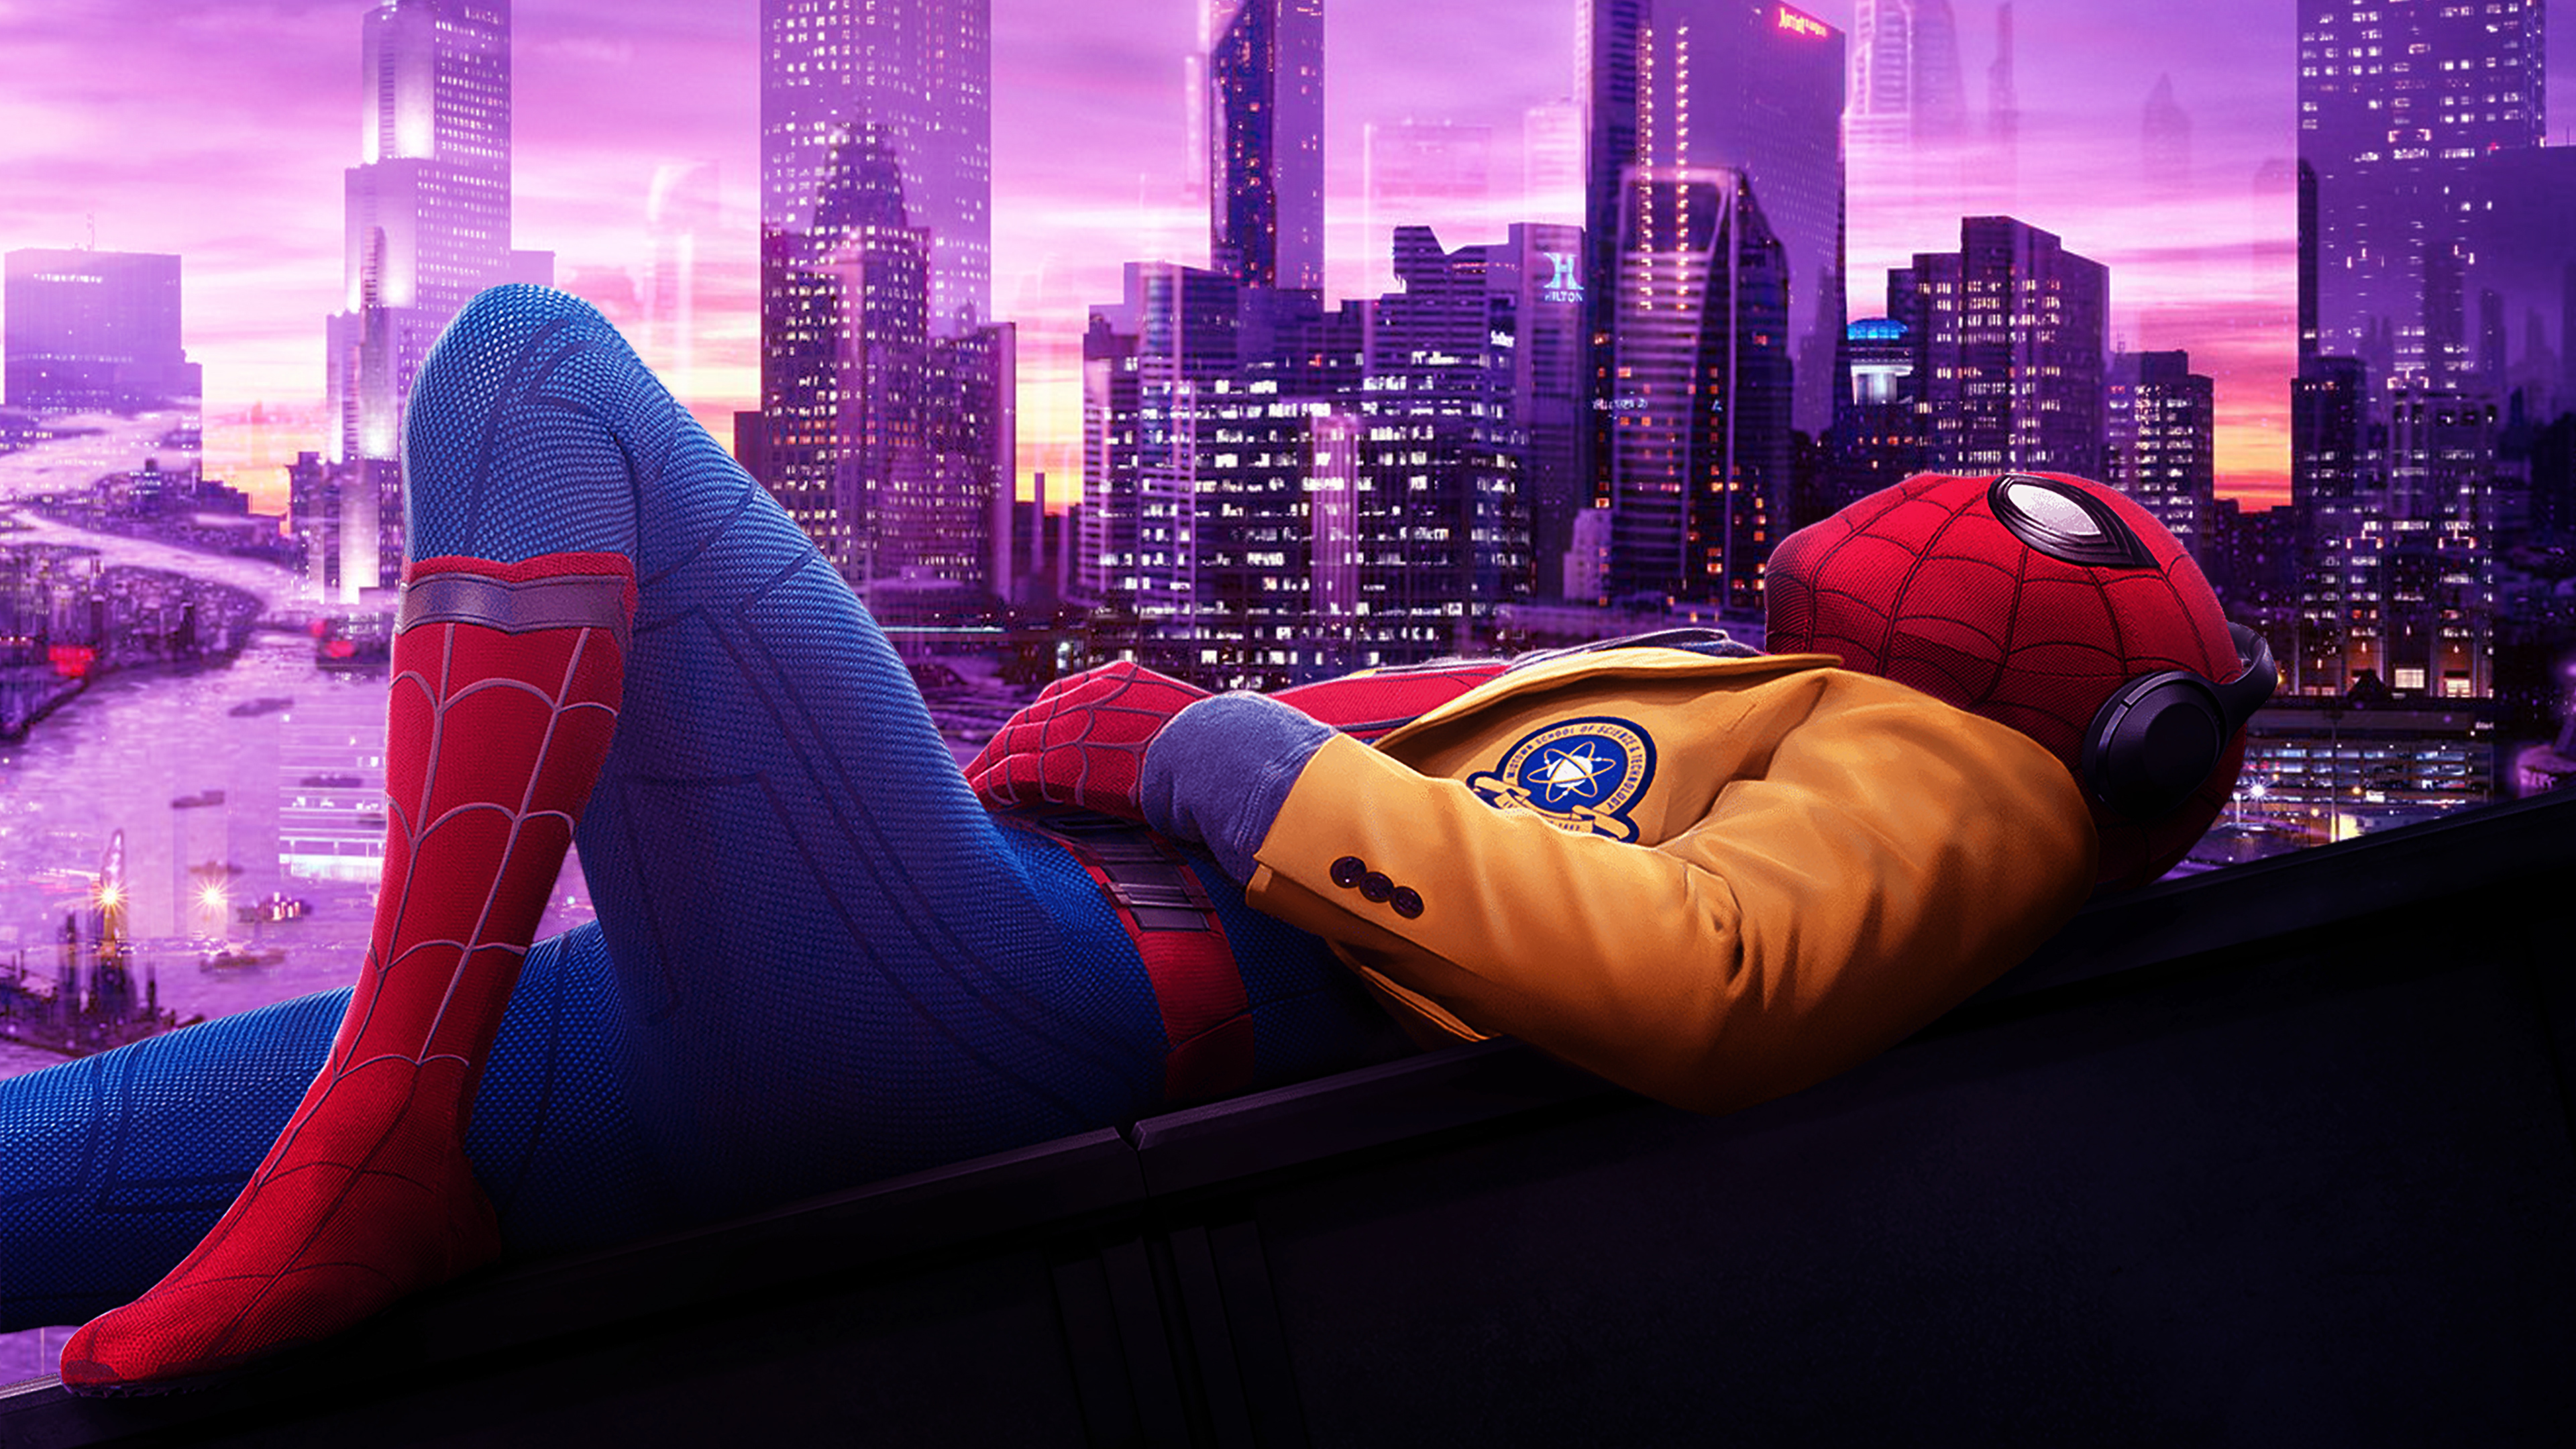 Spiderman Listening Music 4k 2019, HD Superheroes, 4k Wallpapers, Images,  Backgrounds, Photos and Pictures